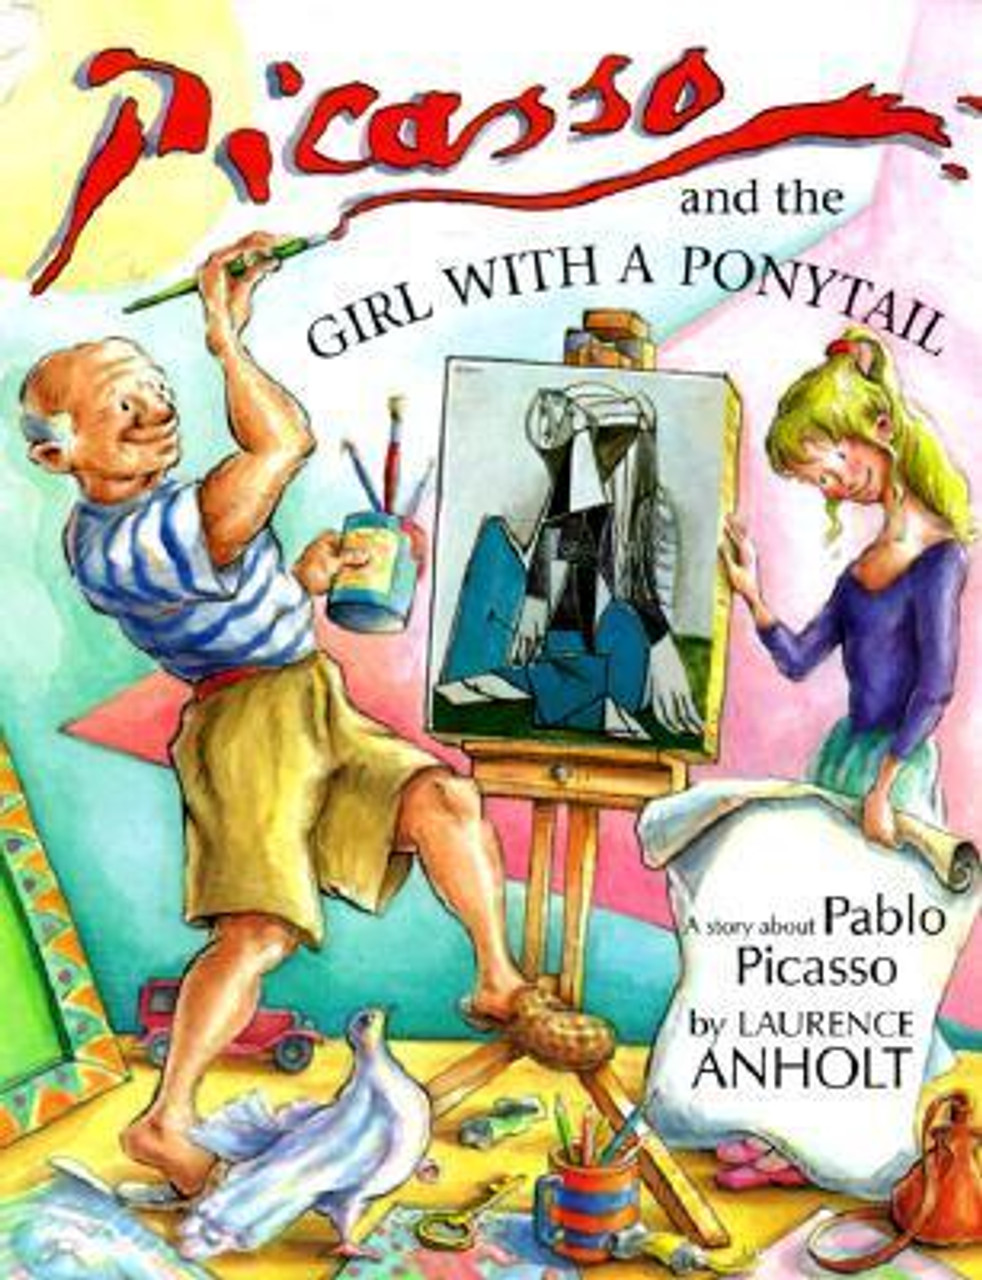 Laurence Anholt / Picasso and the Girl with a Ponytail (Children's Coffee Table book)